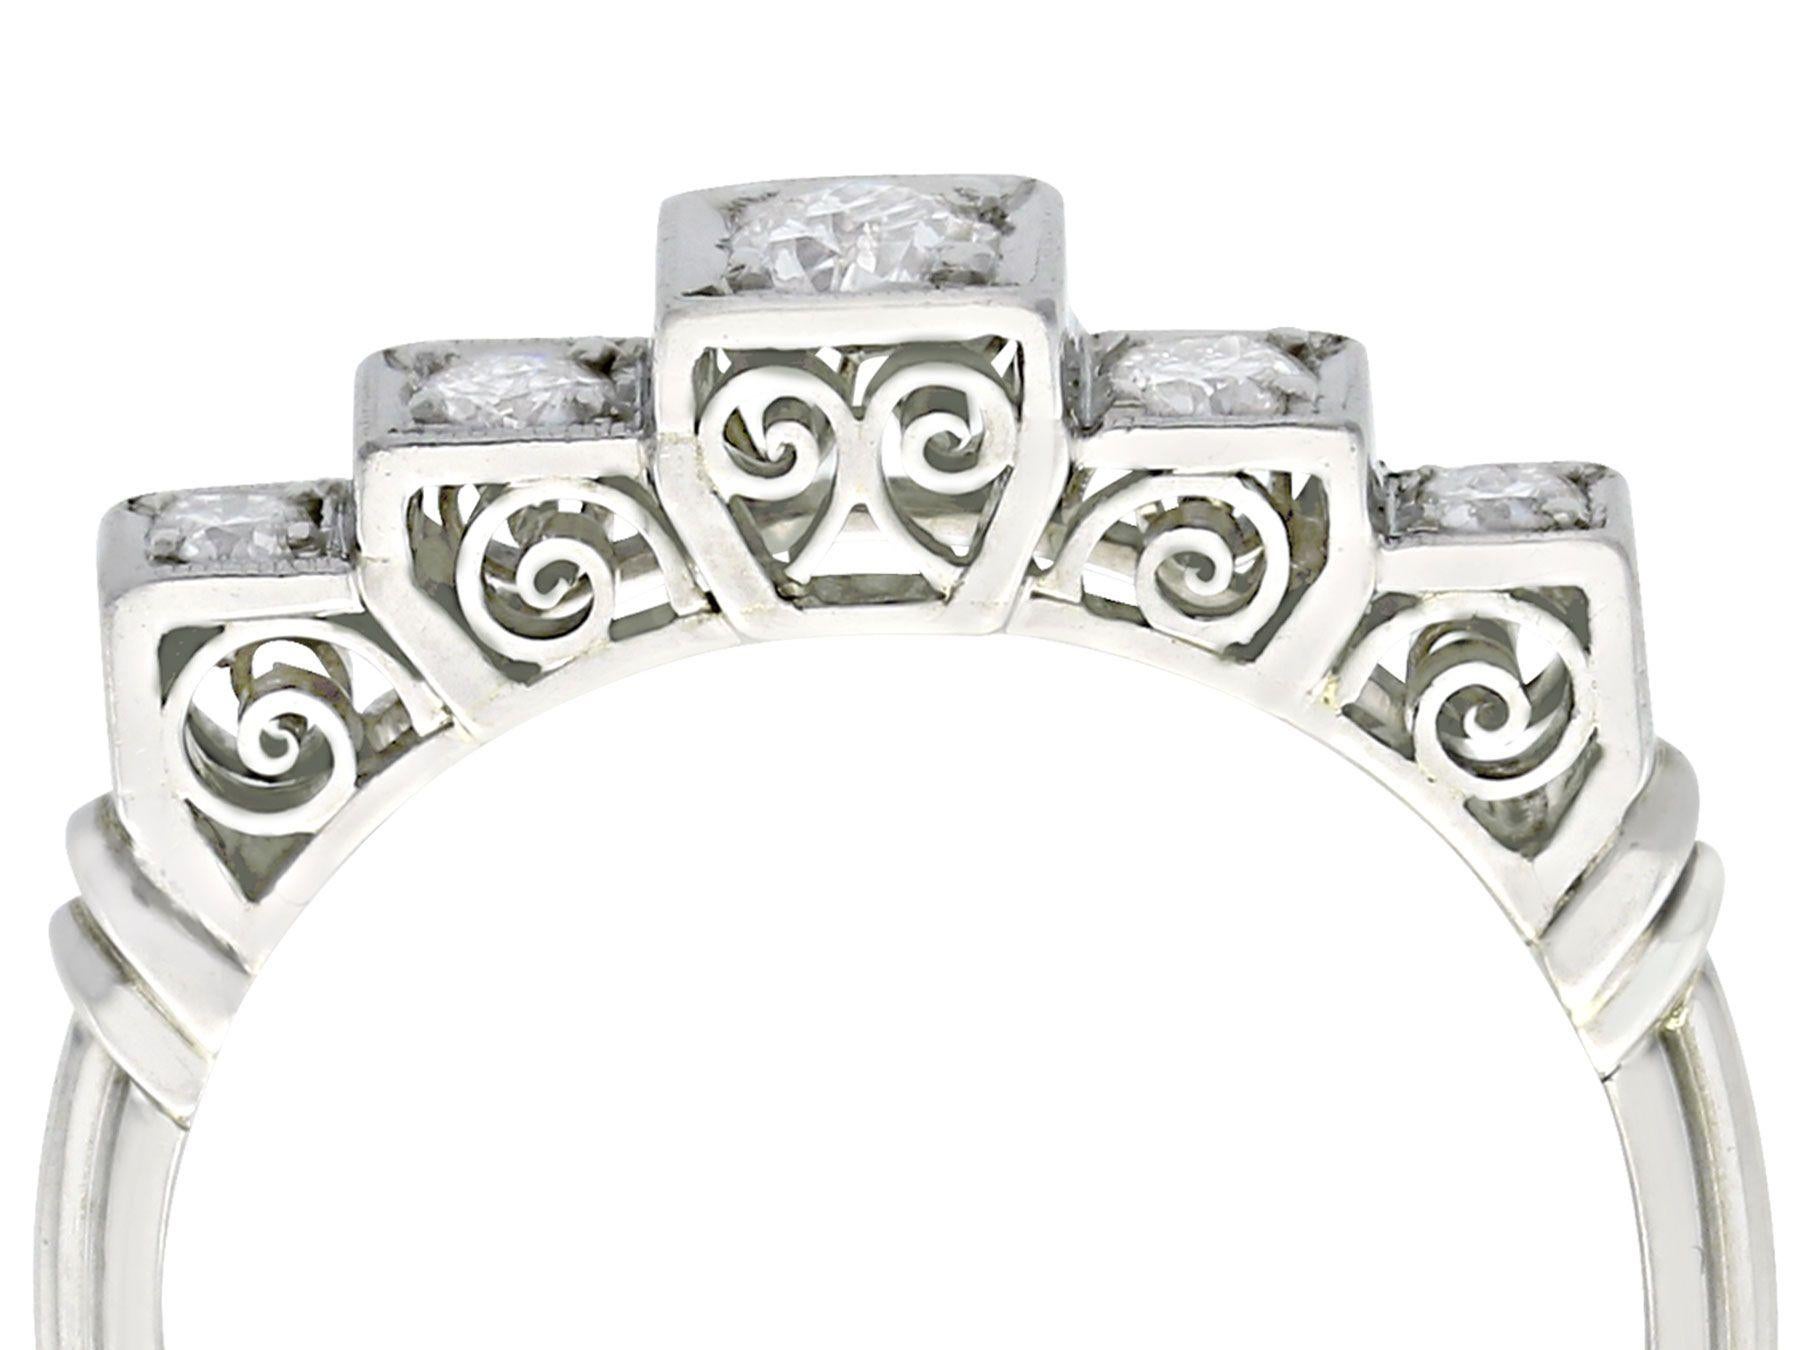 An impressive antique 0.35 carat diamond and 18 karat white gold five stone cocktail ring; part of our diverse antique jewelry and estate jewelry collections.

This fine and impressive graduated five stone diamond ring has been crafted in 18 k white